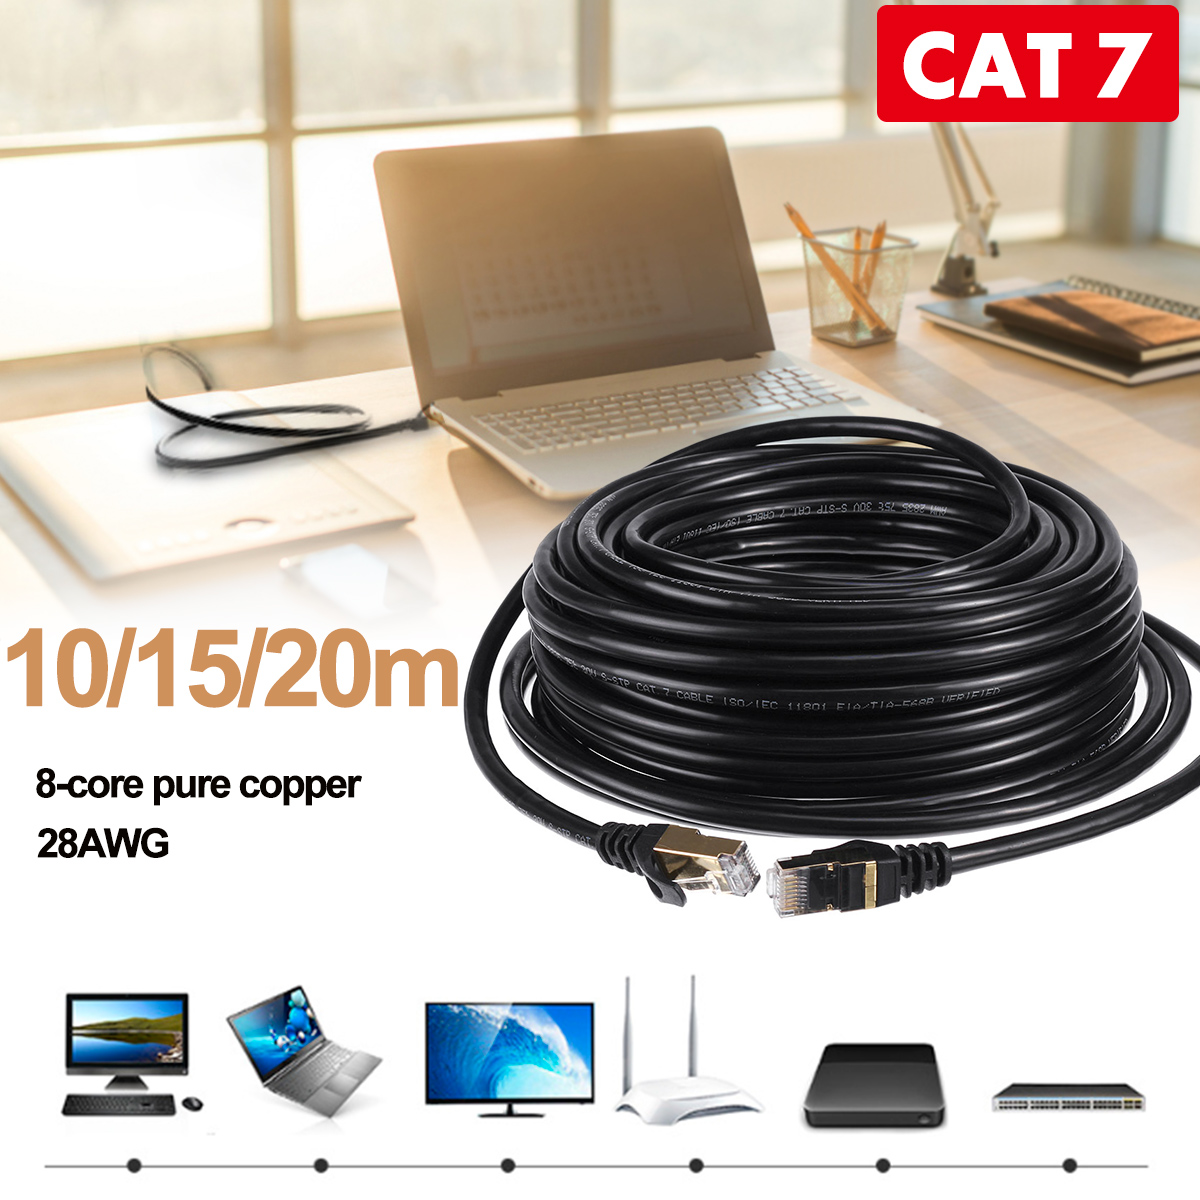 Black-Cat7-28AWG-High-Speed-Pure-Copper-Core-Networking-Cable-Cat7-Cable-LAN-Network-RJ45-Patch-Cord-1621196-2